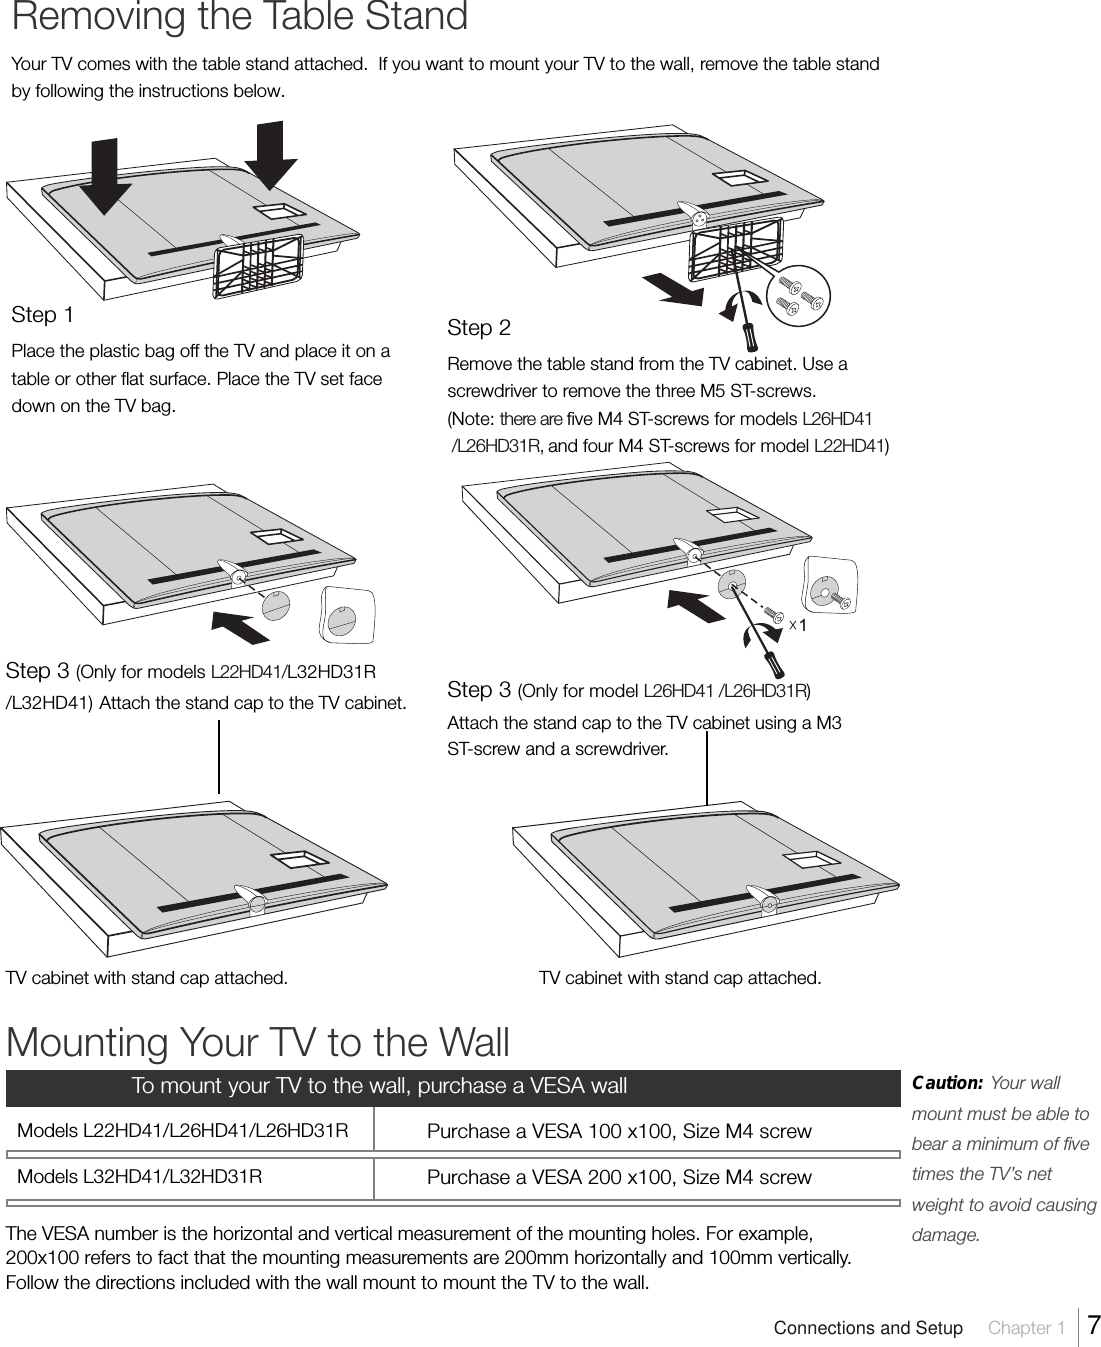 Removing the Table StandYour TV comes with the table stand attached.  If you want to mount your TV to the wall, remove the table standby following the instructions below.Step 1Place the plastic bag off the TV and place it on atable or other flat surface. Place the TV set facedown on the TV bag.Step 3 (Only for models L22HD41/L32HD31R/L32HD41) Attach the stand cap to the TV cabinet.TV cabinet with stand cap attached.Connections and Setup Chapter 1  7Step 2Remove the table stand from the TV cabinet. Use ascrewdriver to remove the three M5 ST-screws.(Note: there are five M4 ST-screws for models L26HD41 /L26HD31R, and four M4 ST-screws for model L22HD41)1Mounting Your TV to the WallThe VESA number is the horizontal and vertical measurement of the mounting holes. For example,200x100 refers to fact that the mounting measurements are 200mm horizontally and 100mm vertically.Follow the directions included with the wall mount to mount the TV to the wall.Caution:     Your wallmount must be able tobear a minimum of fivetimes the TV’s netweight to avoid causingdamage.To mount your TV to the wall, purchase a VESA wallStep 3 (Only for model L26HD41 /L26HD31R)Attach the stand cap to the TV cabinet using a M3ST-screw and a screwdriver.TV cabinet with stand cap attached.Models L22HD41/L26HD41/L26HD31R Purchase a VESA 100 x100, Size M4 screwModels L32HD41/L32HD31R Purchase a VESA 200 x100, Size M4 screw